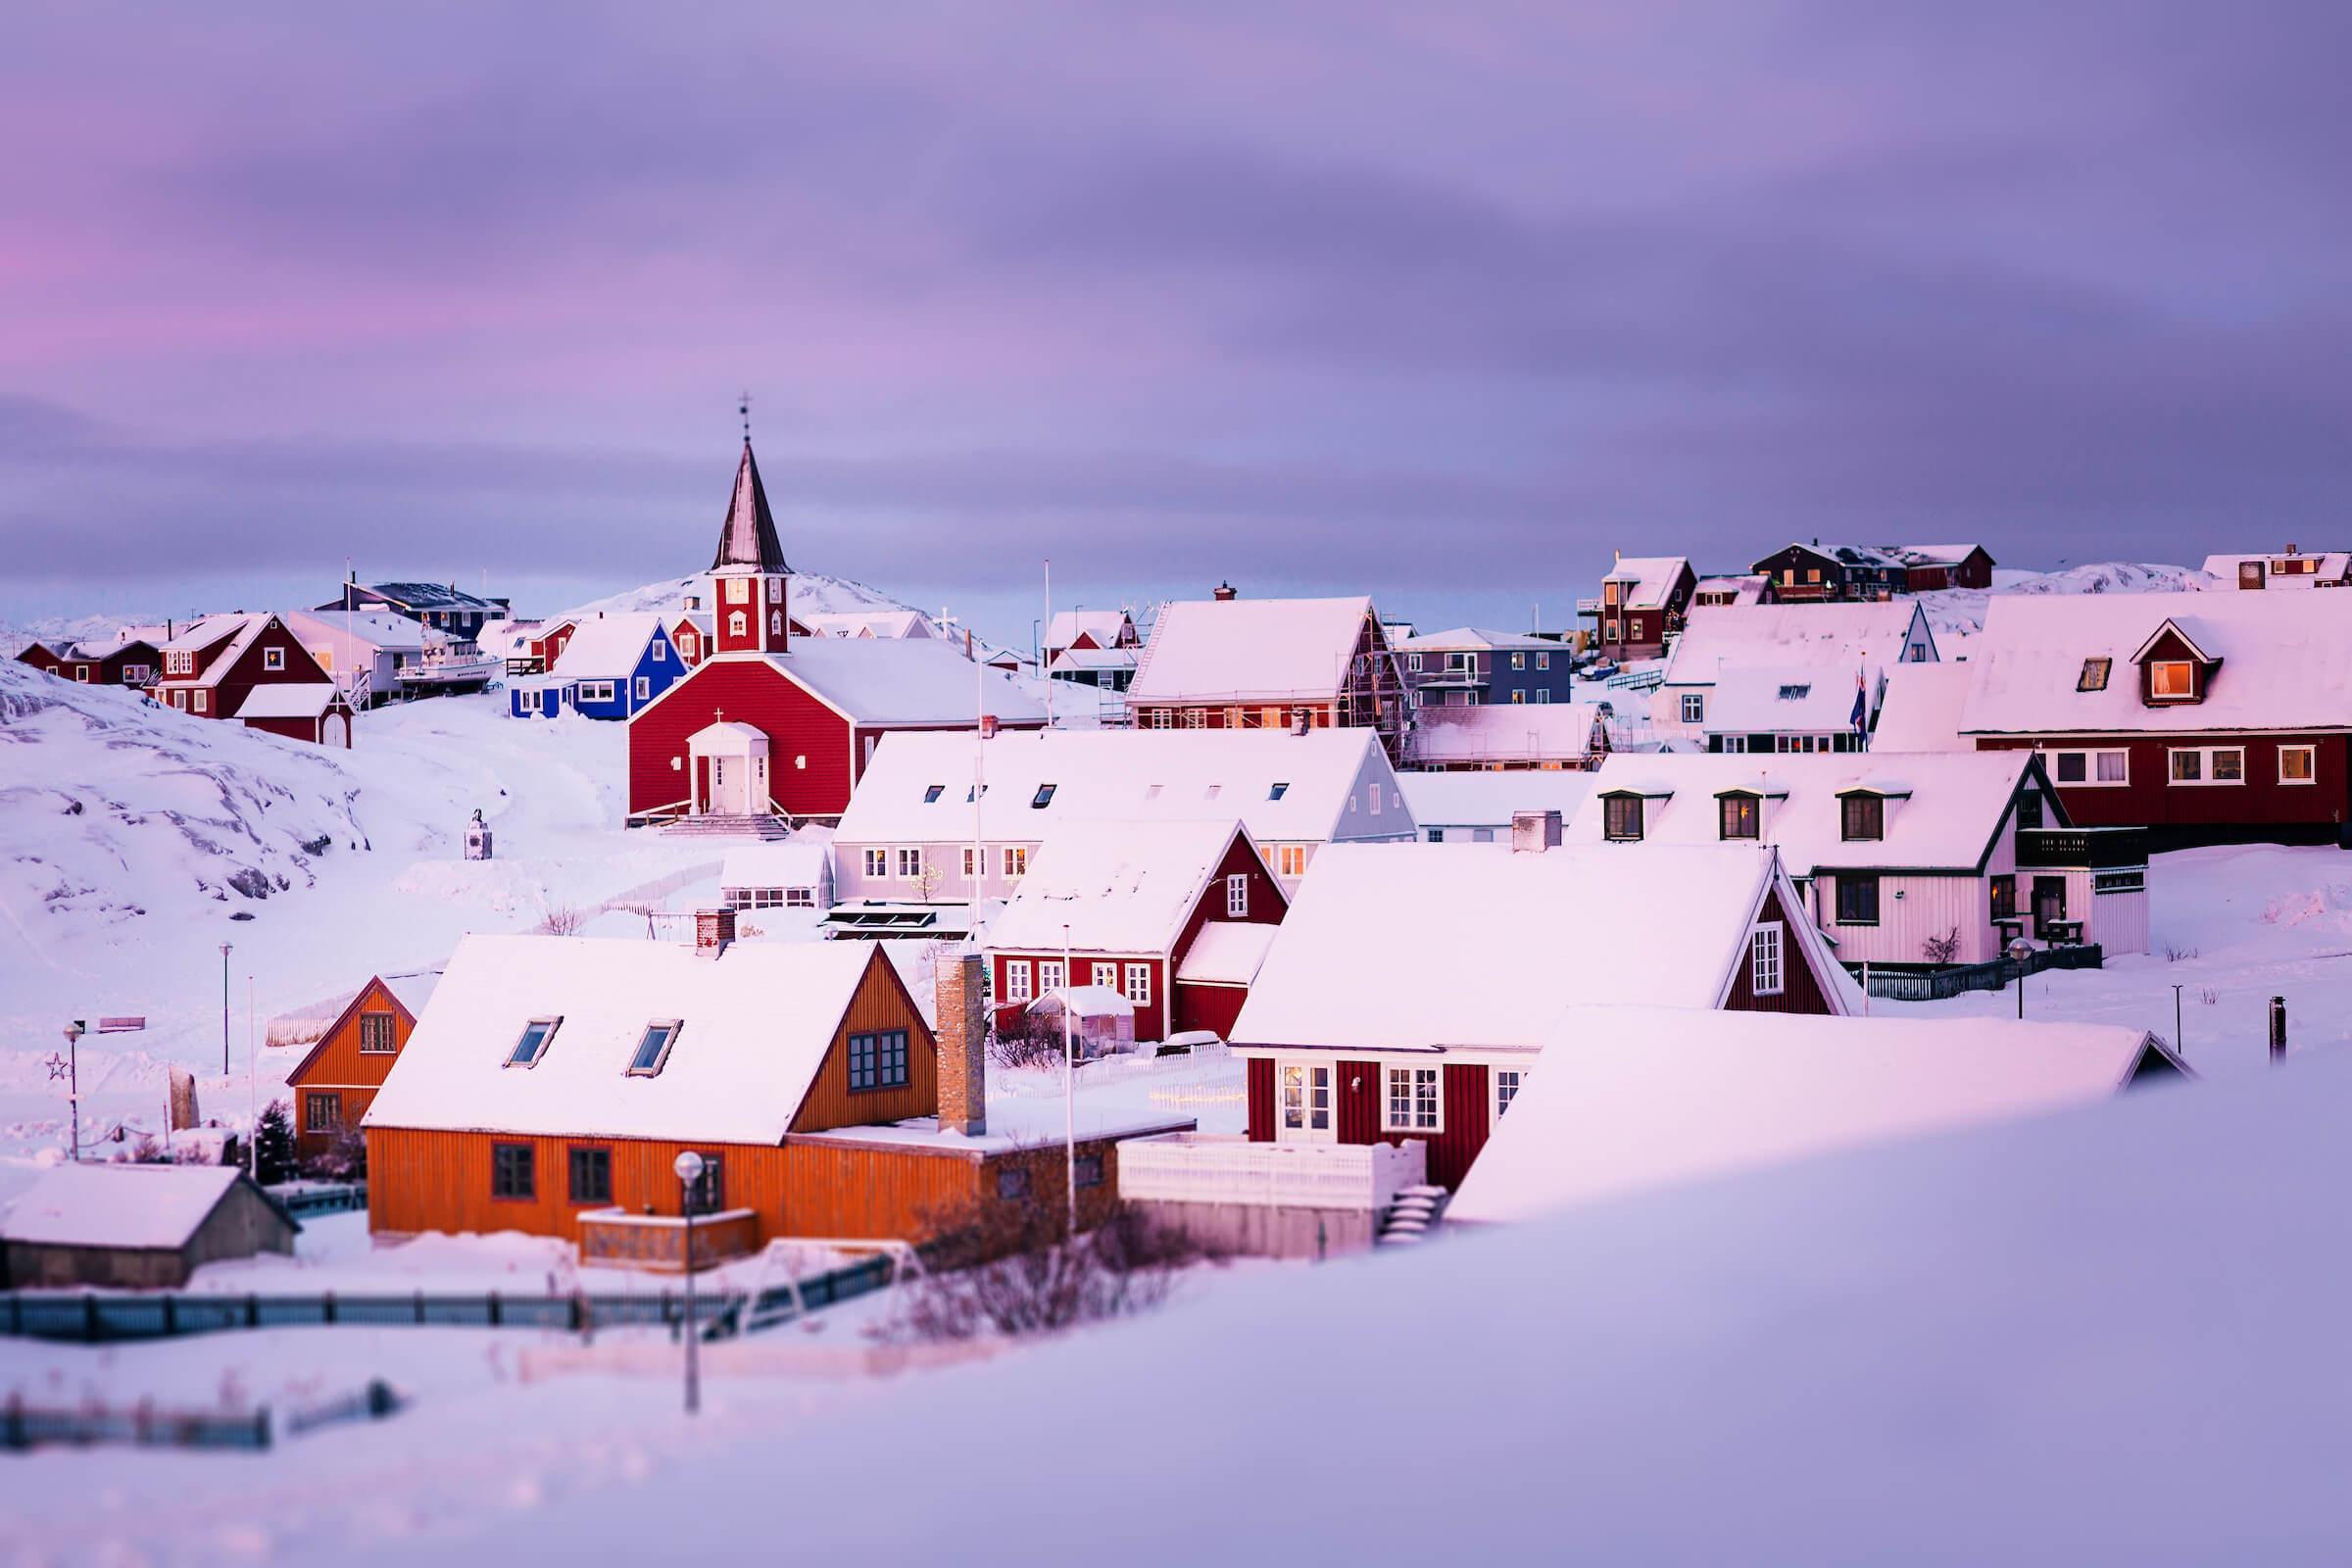 The old part of Nuuk in Greenland on a cold winter day in December. Photo by Rebecca Gustafsson.jpg